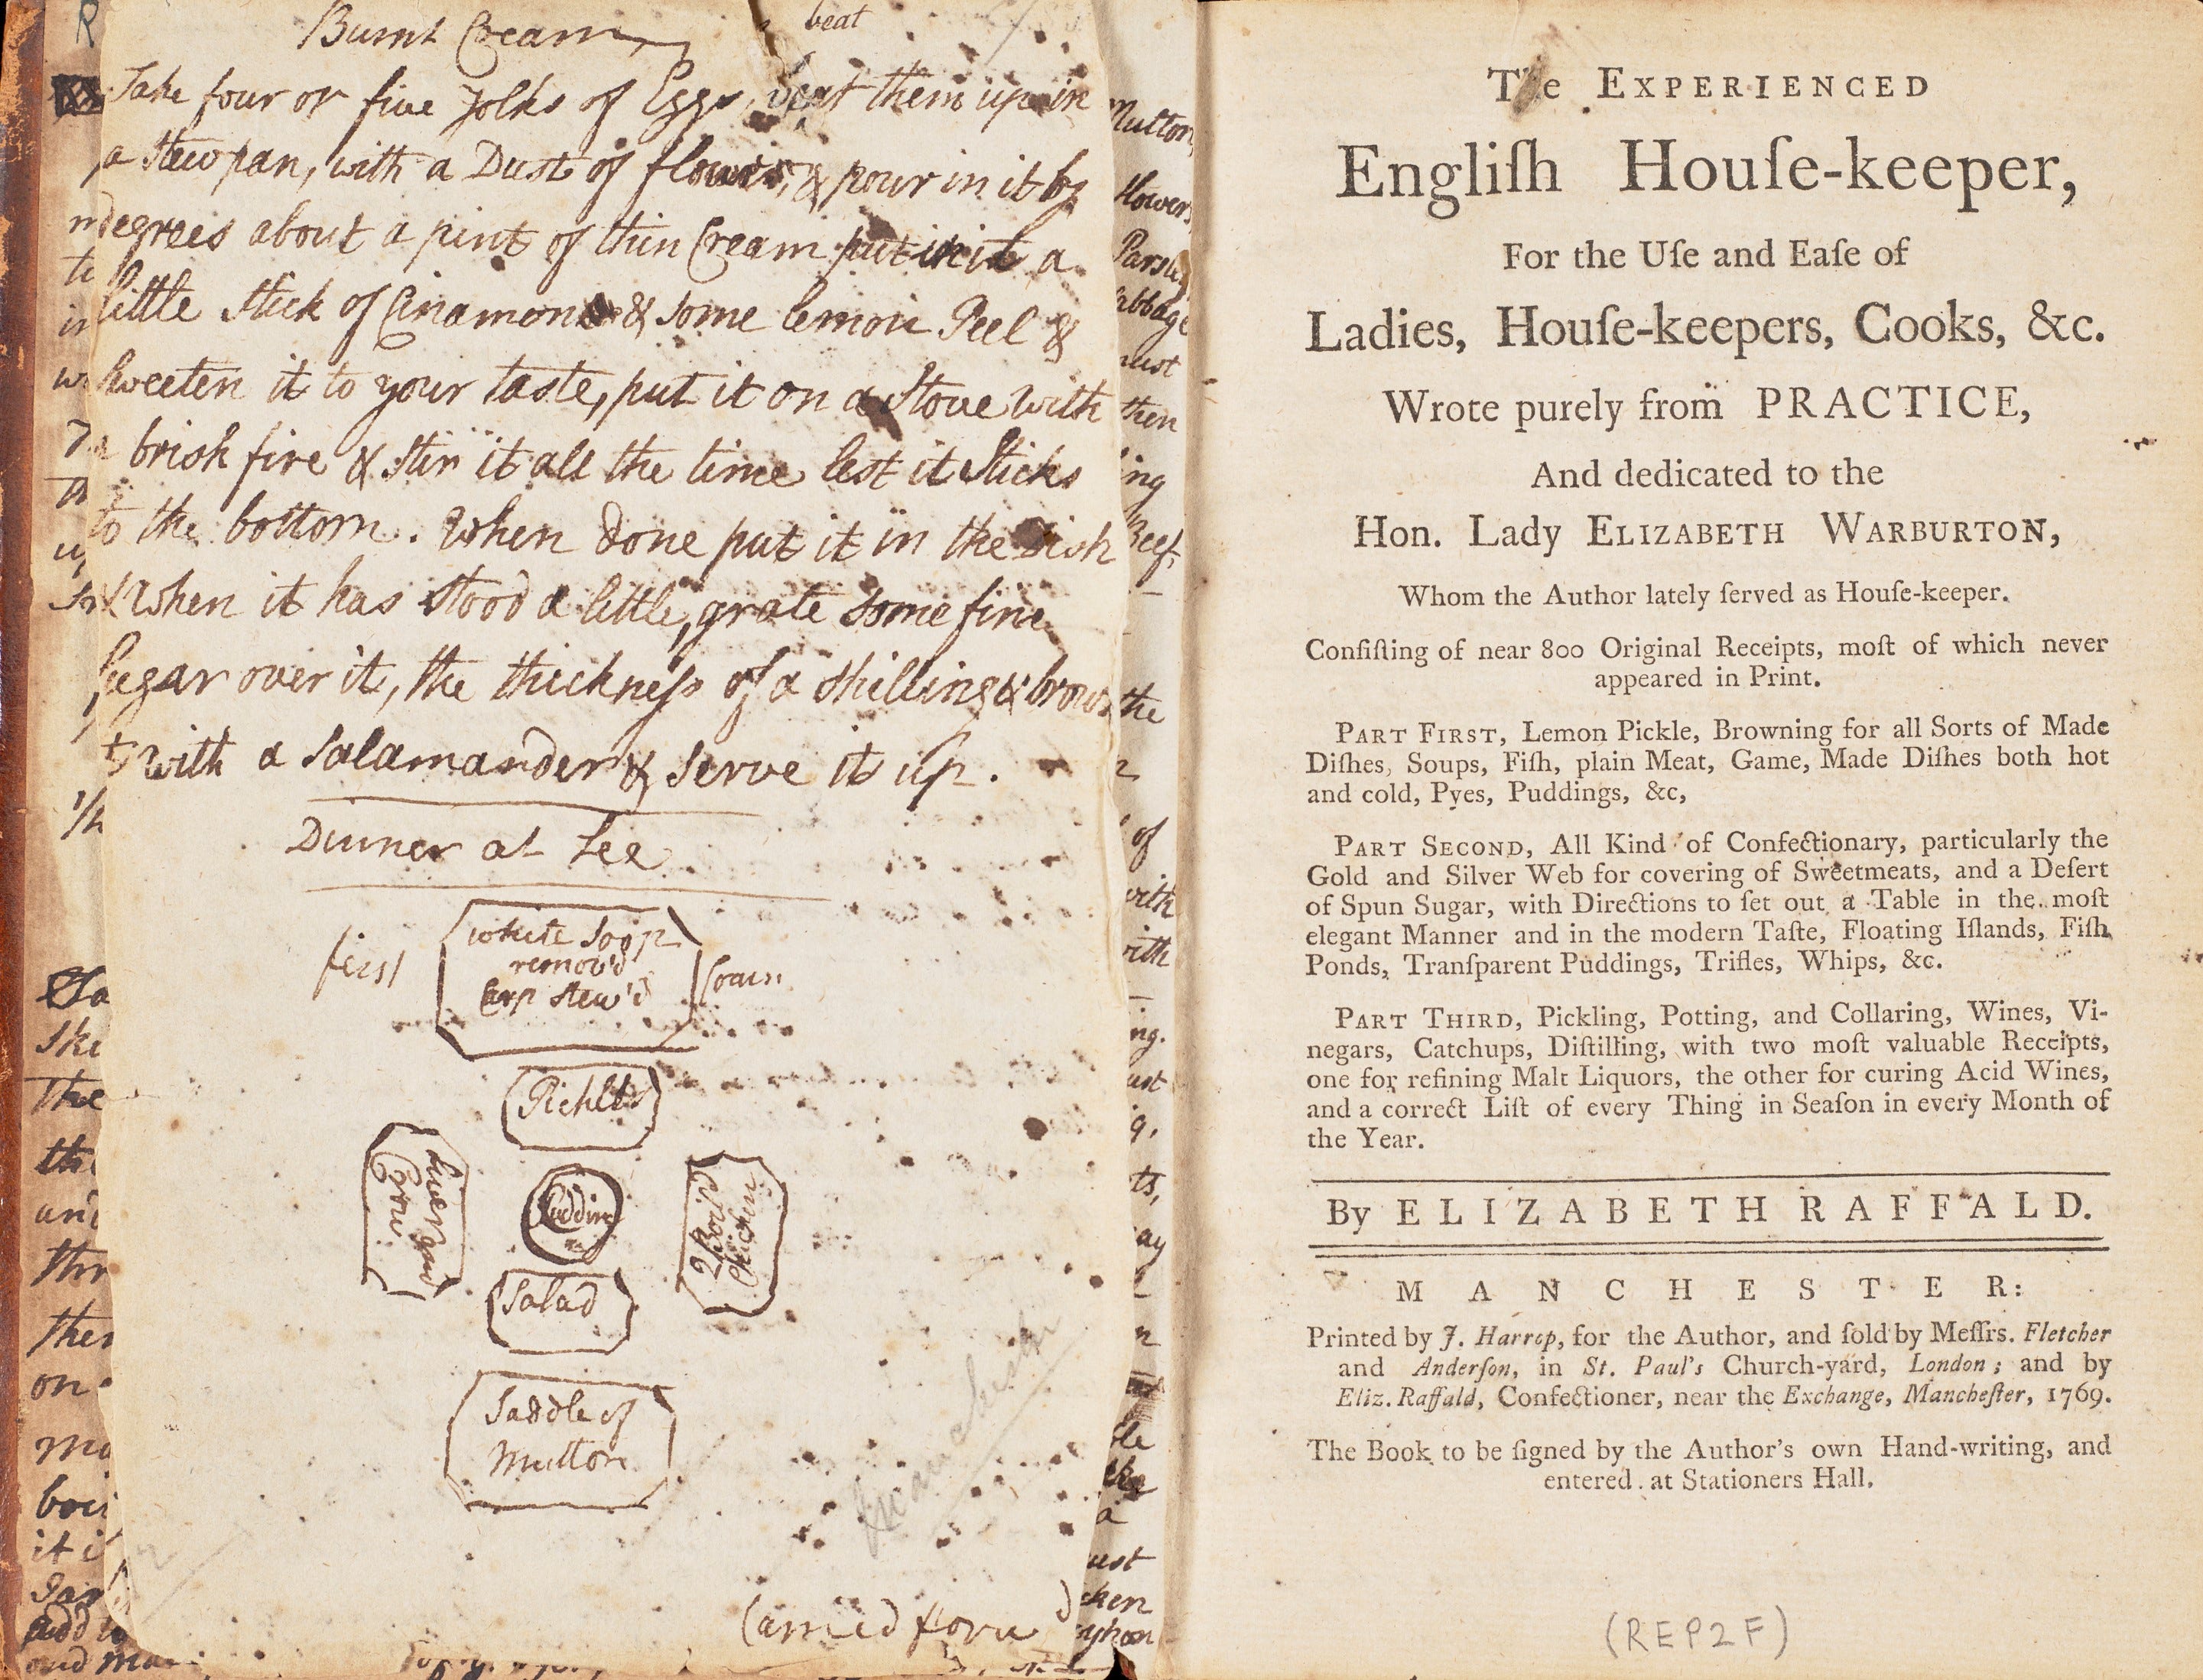 Double-page spread. On the right, the printed title-page of an 18th century cookery book. On the left, a handwritten recipe.